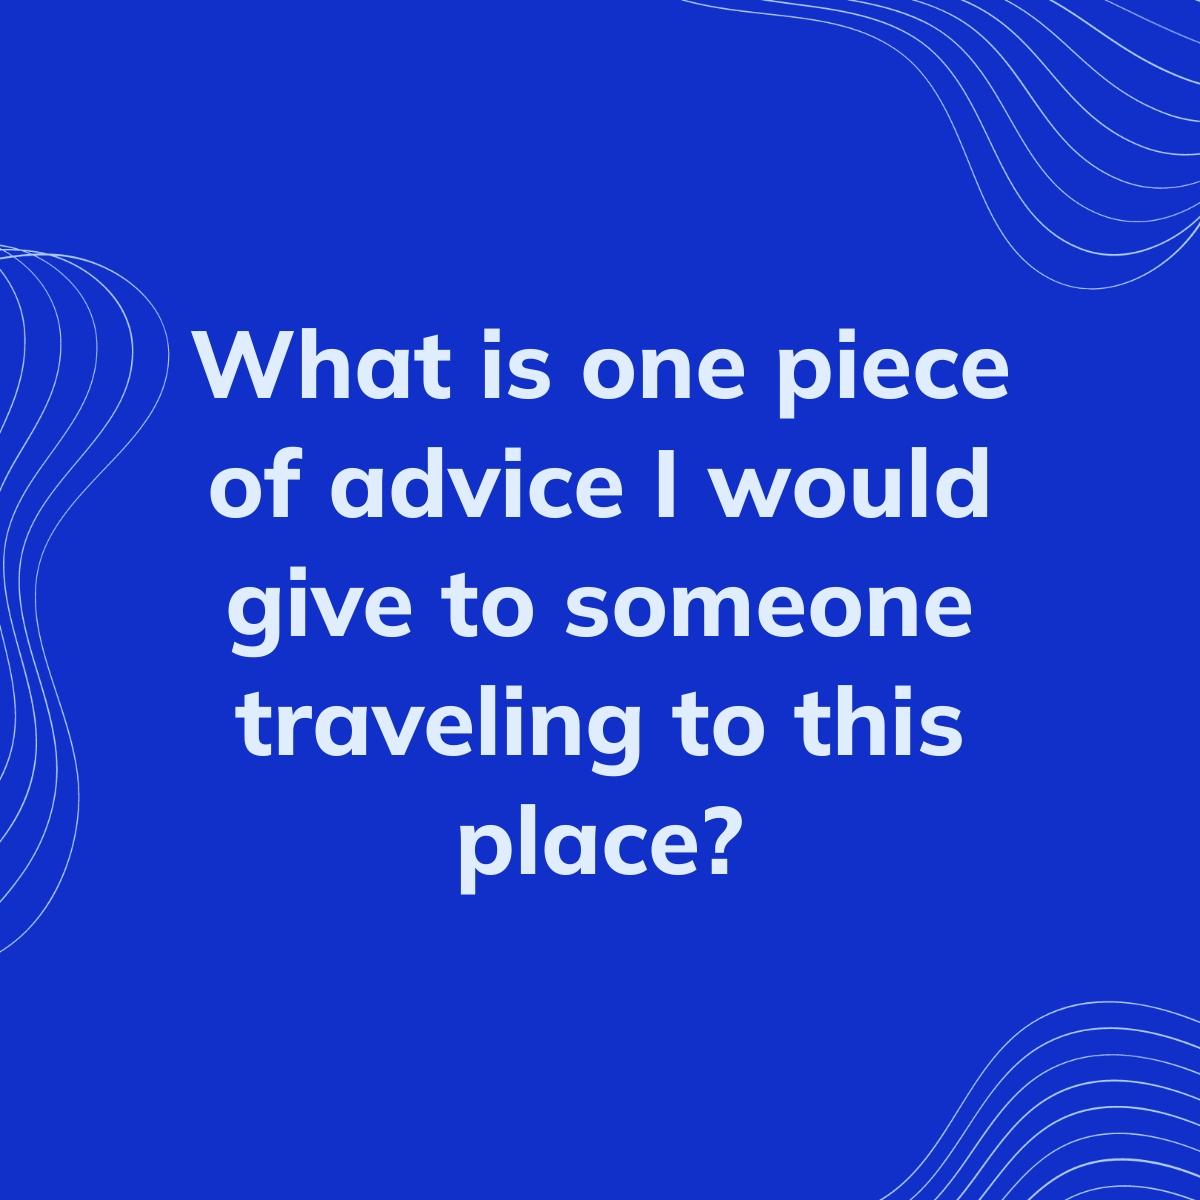 Journal Prompt: What is one piece of advice I would give to someone traveling to this place?